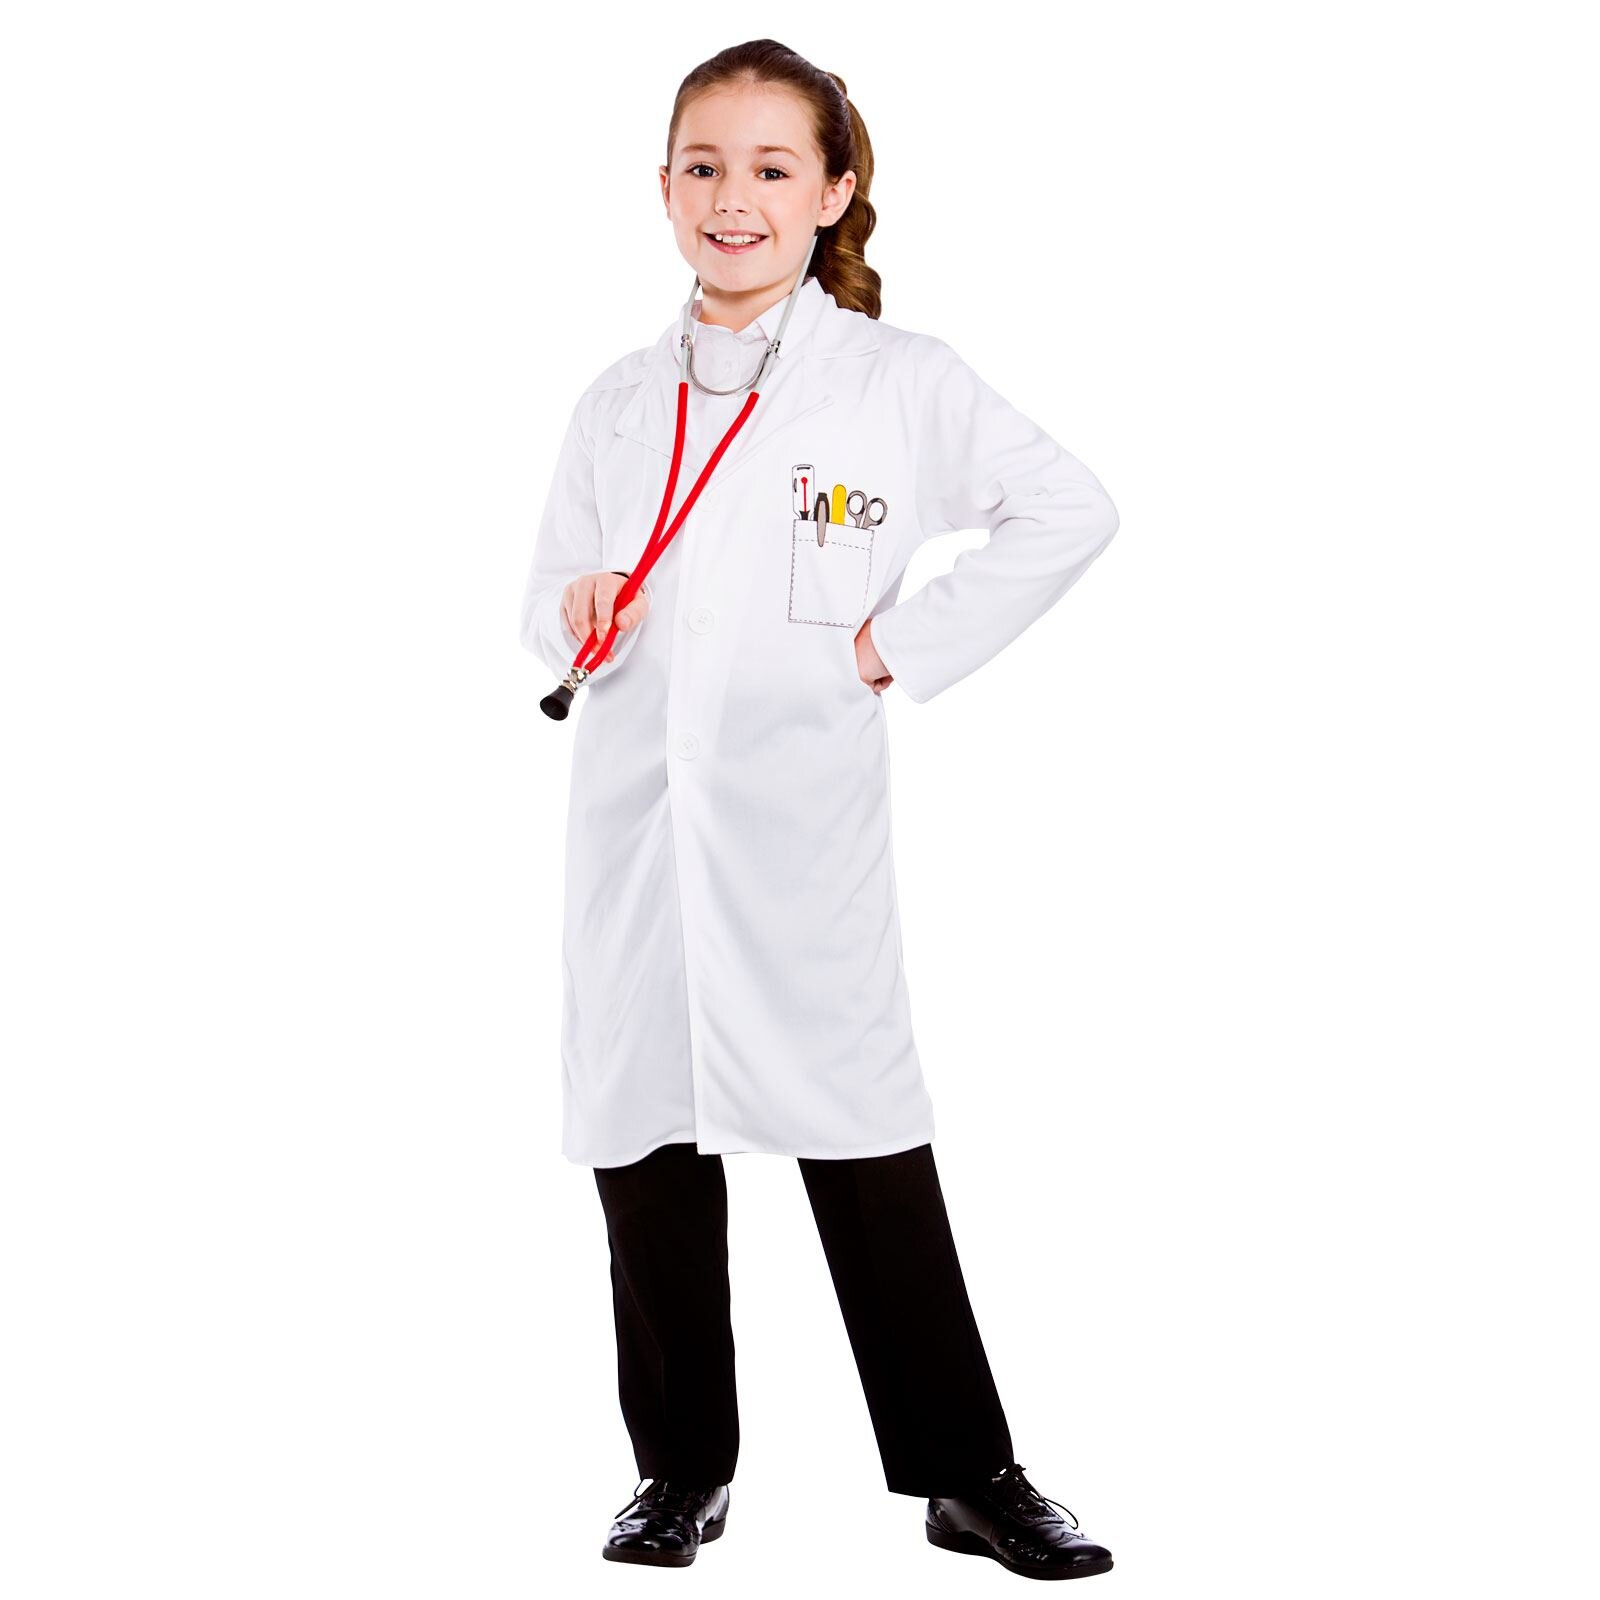 Childrens White Doctors Coat Fancy Dress Up Party Costume New - Medium (Age 5-7)